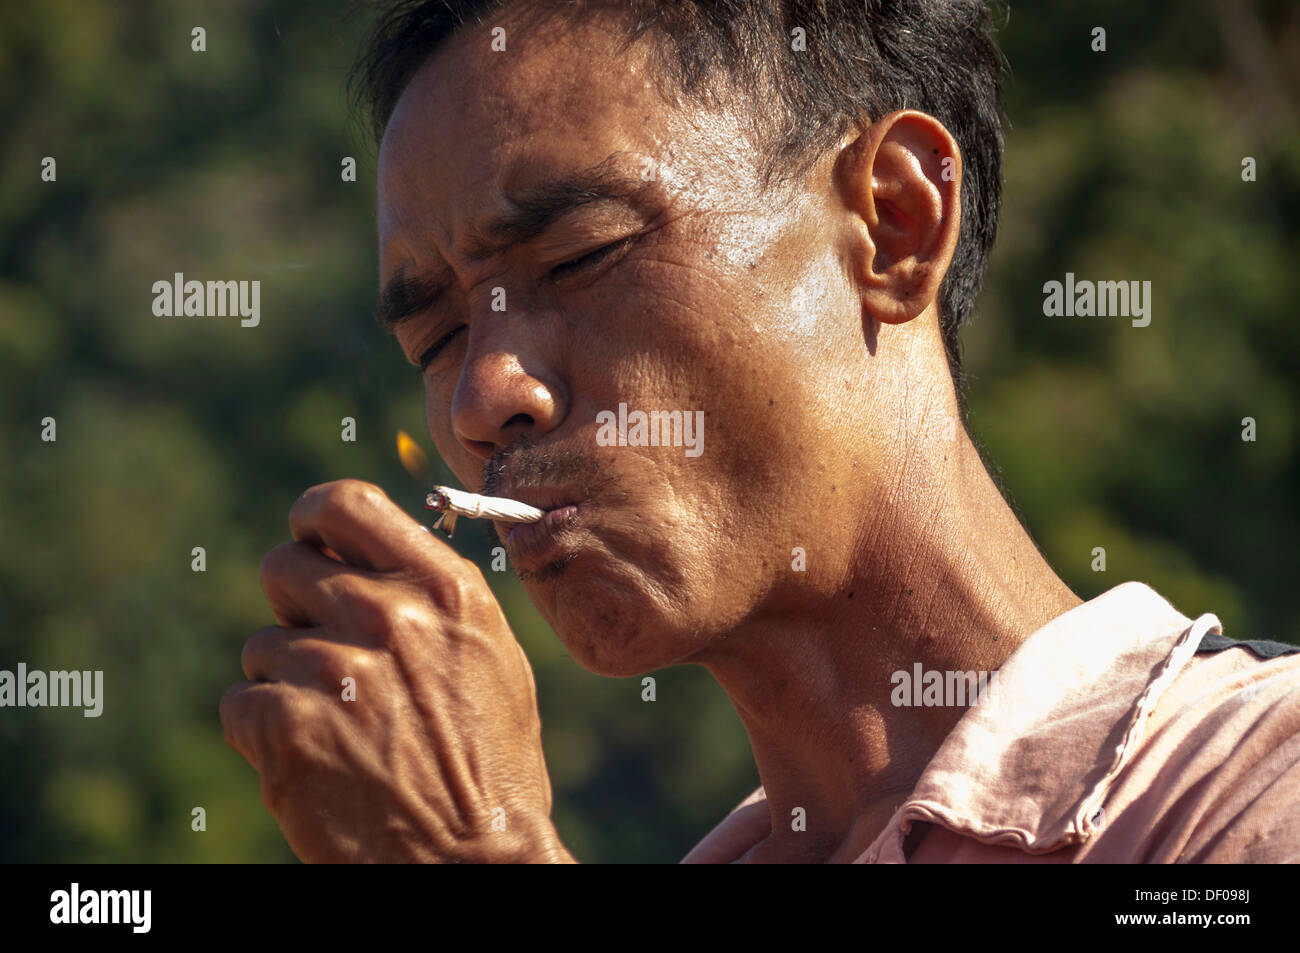 Man from the Shan or Thai Yai ethnic minority is lighting a cigarette, Soppong or Pang Mapha area, Northern Thailand, Thailand Stock Photo